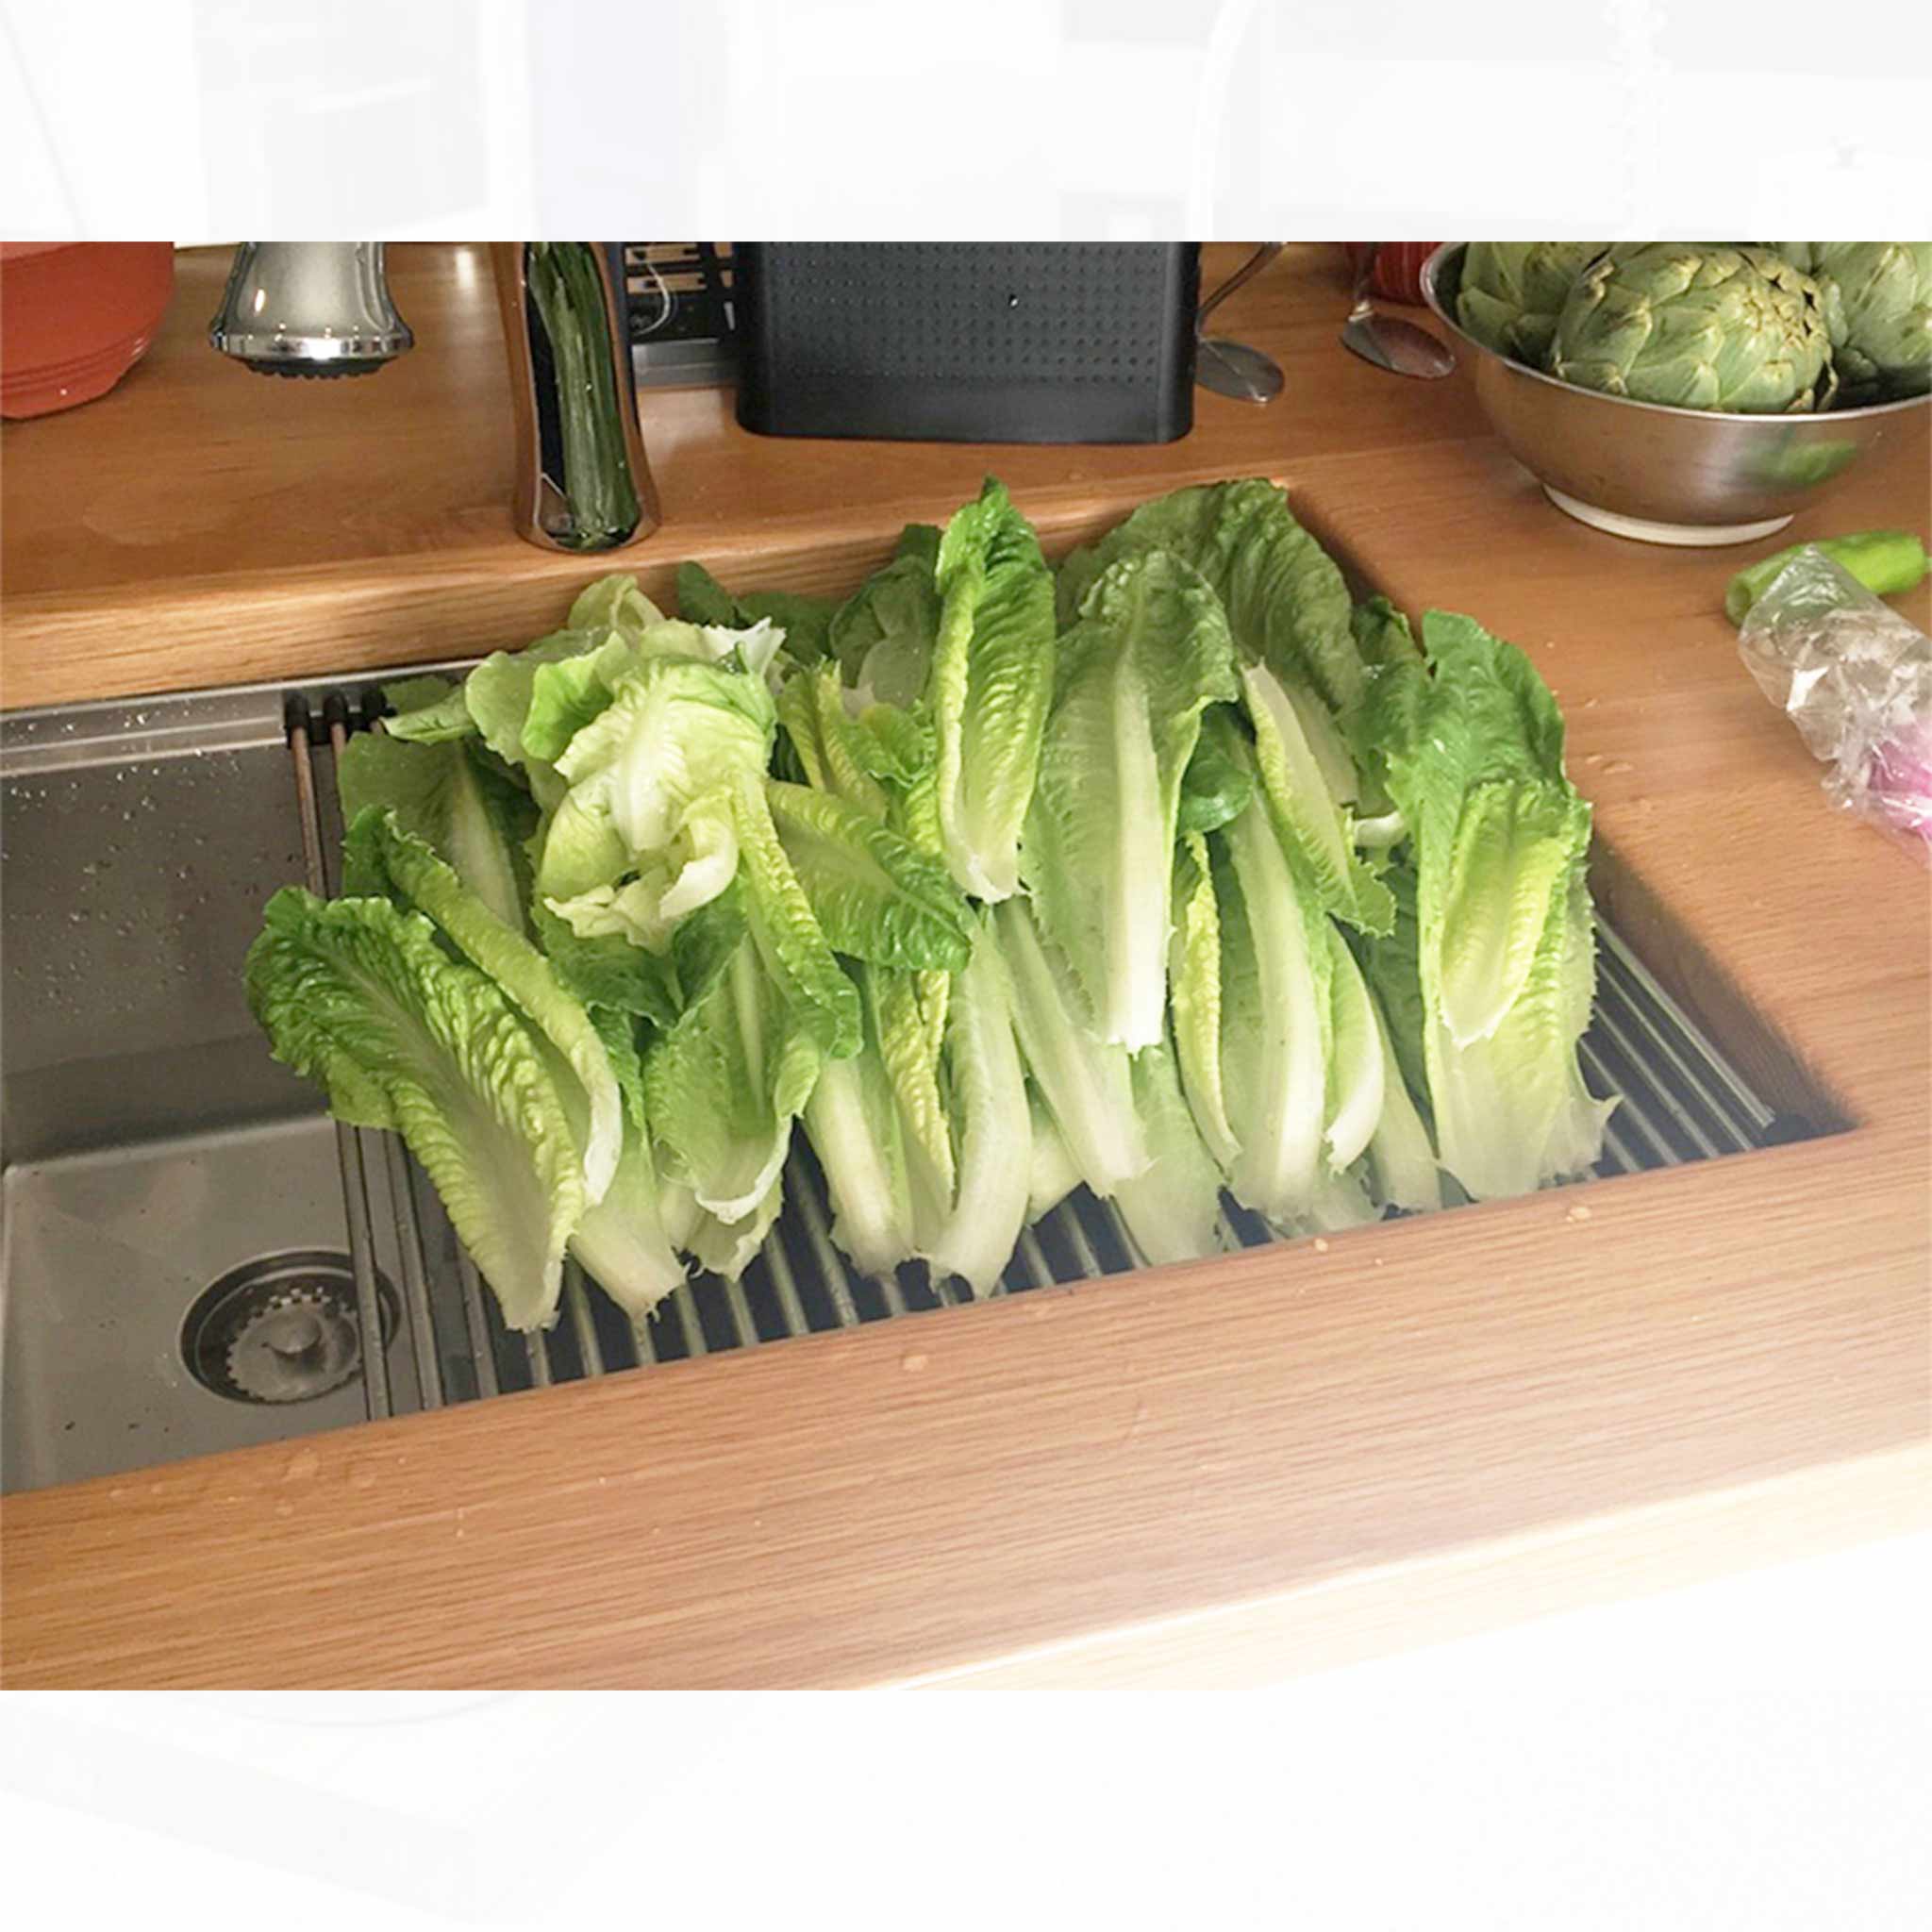 Customer photo of our 26" workstation sink installed in butcher block counter. Features offset drain left. Made with 16 gauge type 304 stainless steel and designed for undermount installation. Features Create Good Sinks' patented, award-winning seamless drain